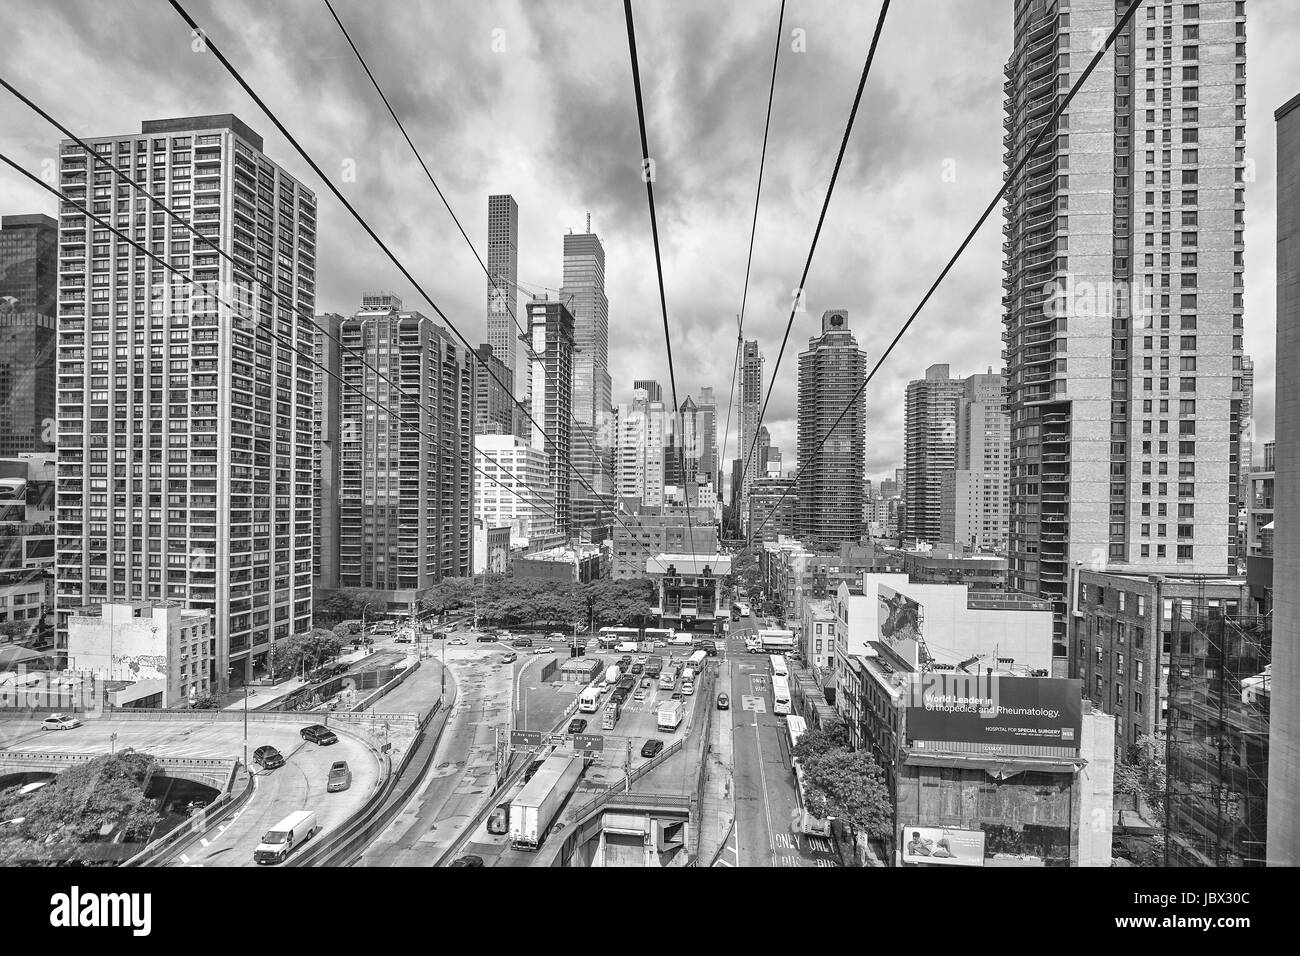 New York City, USA - May 26, 2017: Cloudy Manhattan seen from aerial tramway going to Roosevelt Island. Stock Photo